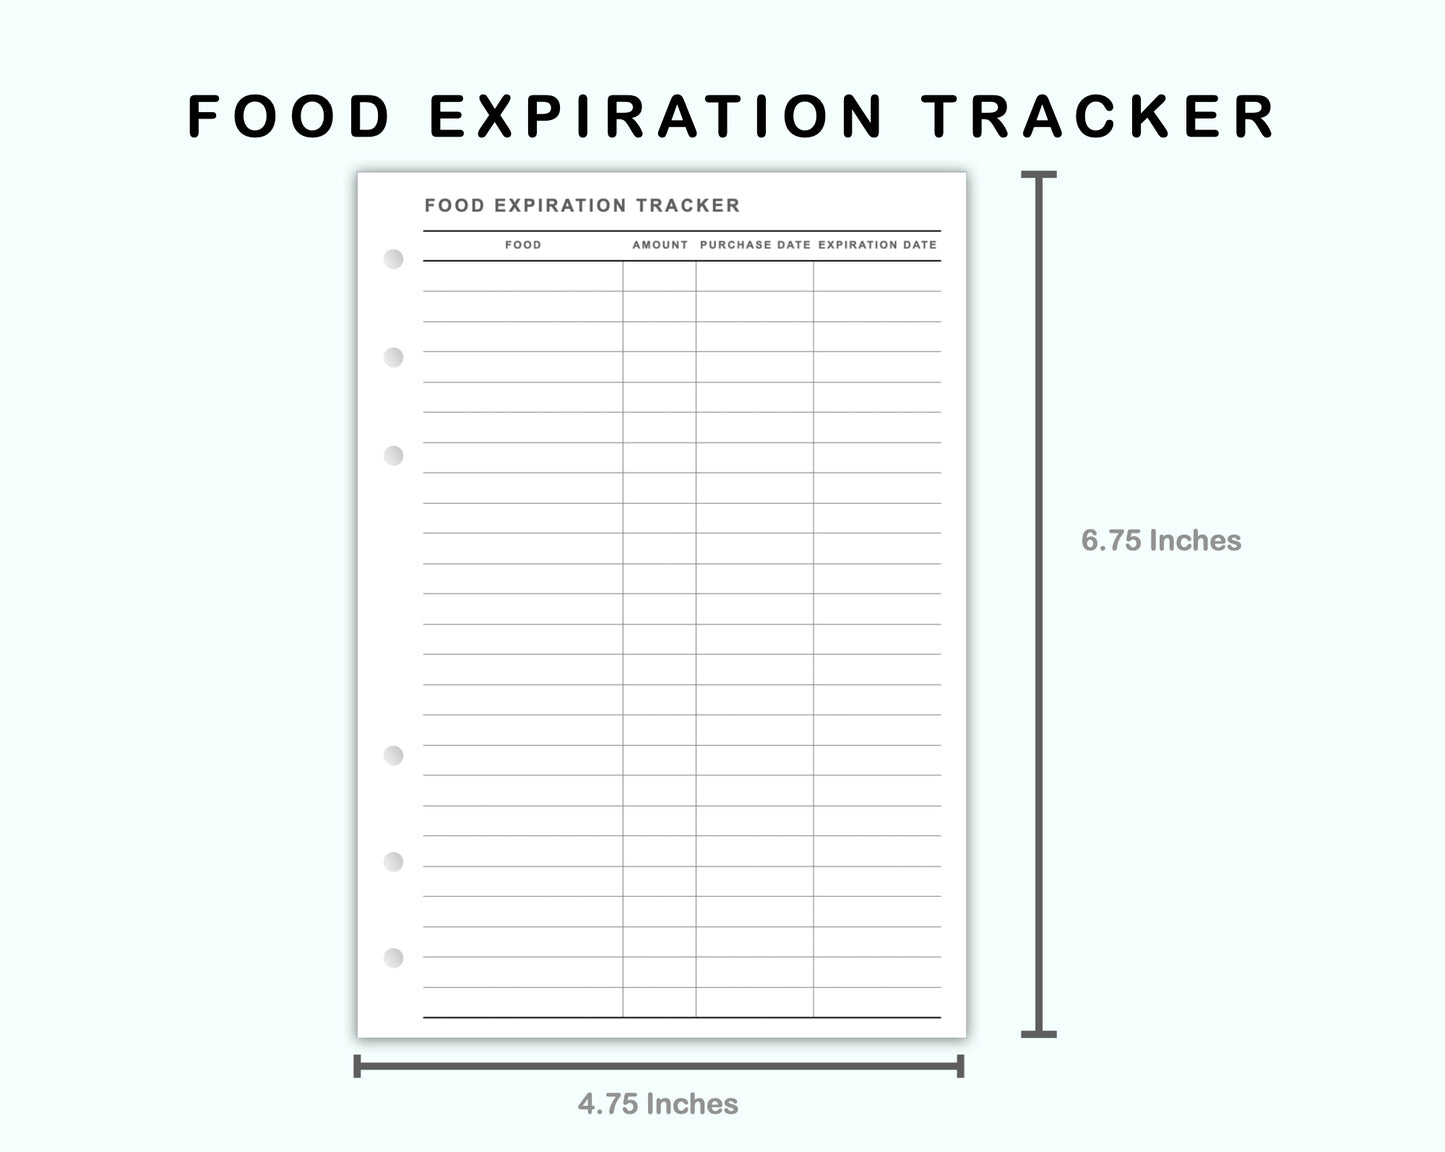 Personal Wide Inserts - Food Expiration Tracker